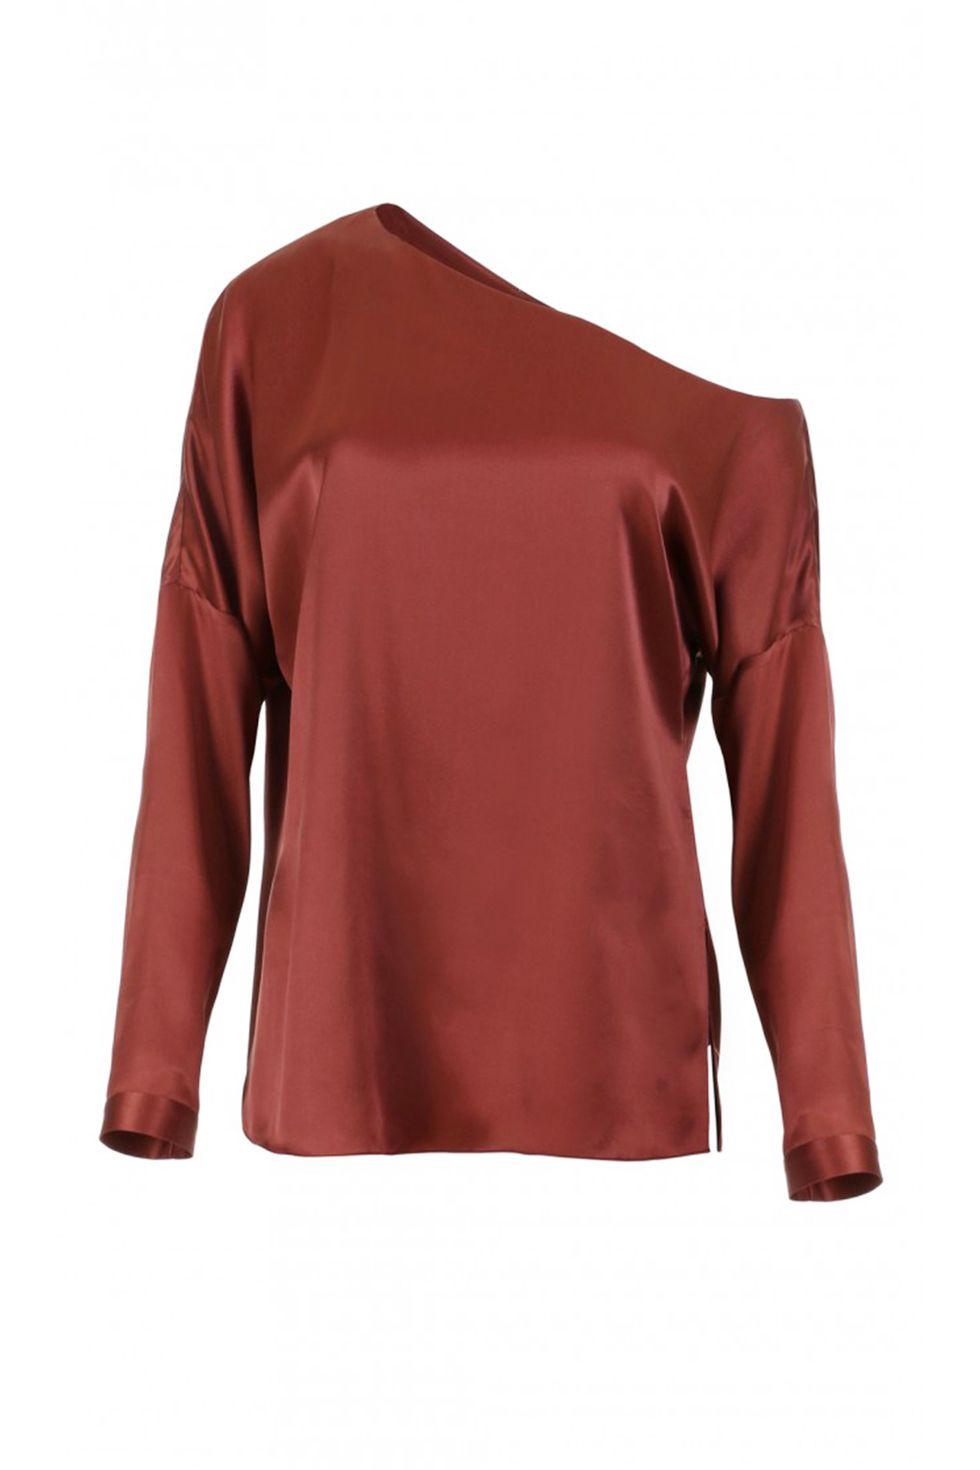 Alexander Wang T by Knotted Hammered Silk-satin Blouse - Cream